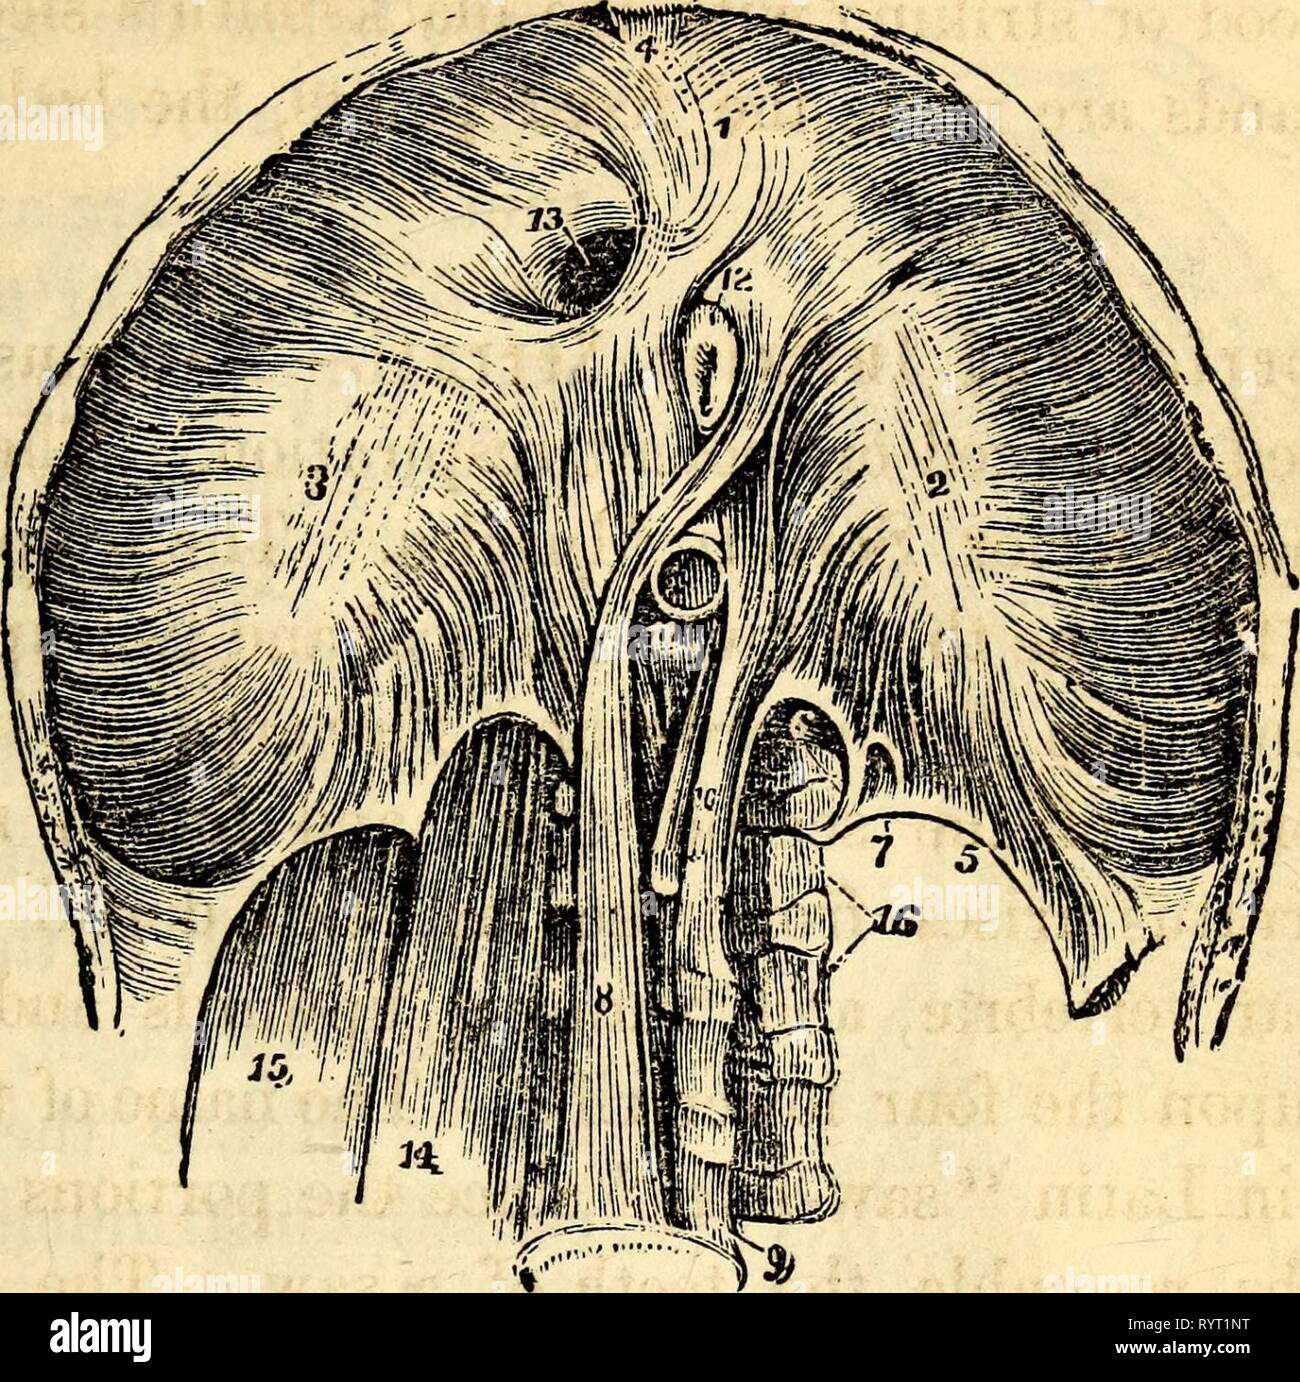 Elementary anatomy and physiology  Elementary anatomy and physiology : for colleges, academies, and other schools . elementaryanato00hitc Year: 1869  AND PHYSIOLOGY. 125    A View of the Under Side of the Diaphragm. 1, 2, 3, The Greater Muscle of the Dia- phragm inserted into the Cordiform Tendon. 4, The small triangular space behind the Sternum, covered only by Serous Membrane, and through which Hernia sometimes pass. 5, Ligamentum Arcuatum of the Left Side. 6, Point of Origin of the Psoas Mag- nus. 7, A small Opening for the Lesser Splanchnic Nerve. 8, One of the Crura of the Diaphragm. 9, F Stock Photo